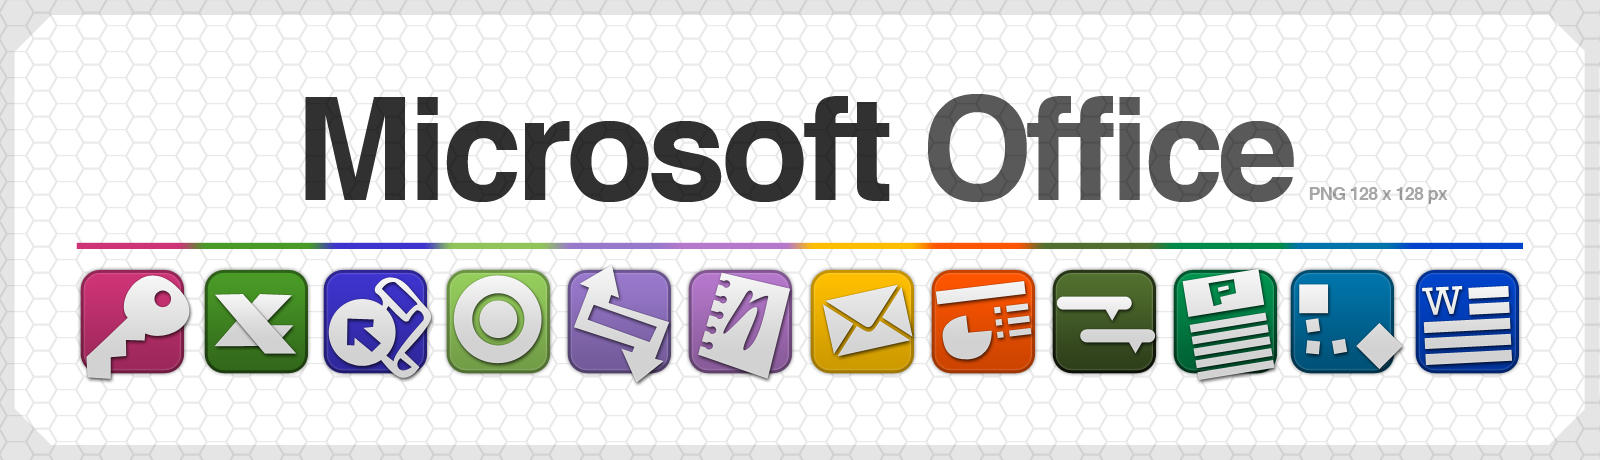 microsoft office clipart icons - photo #5